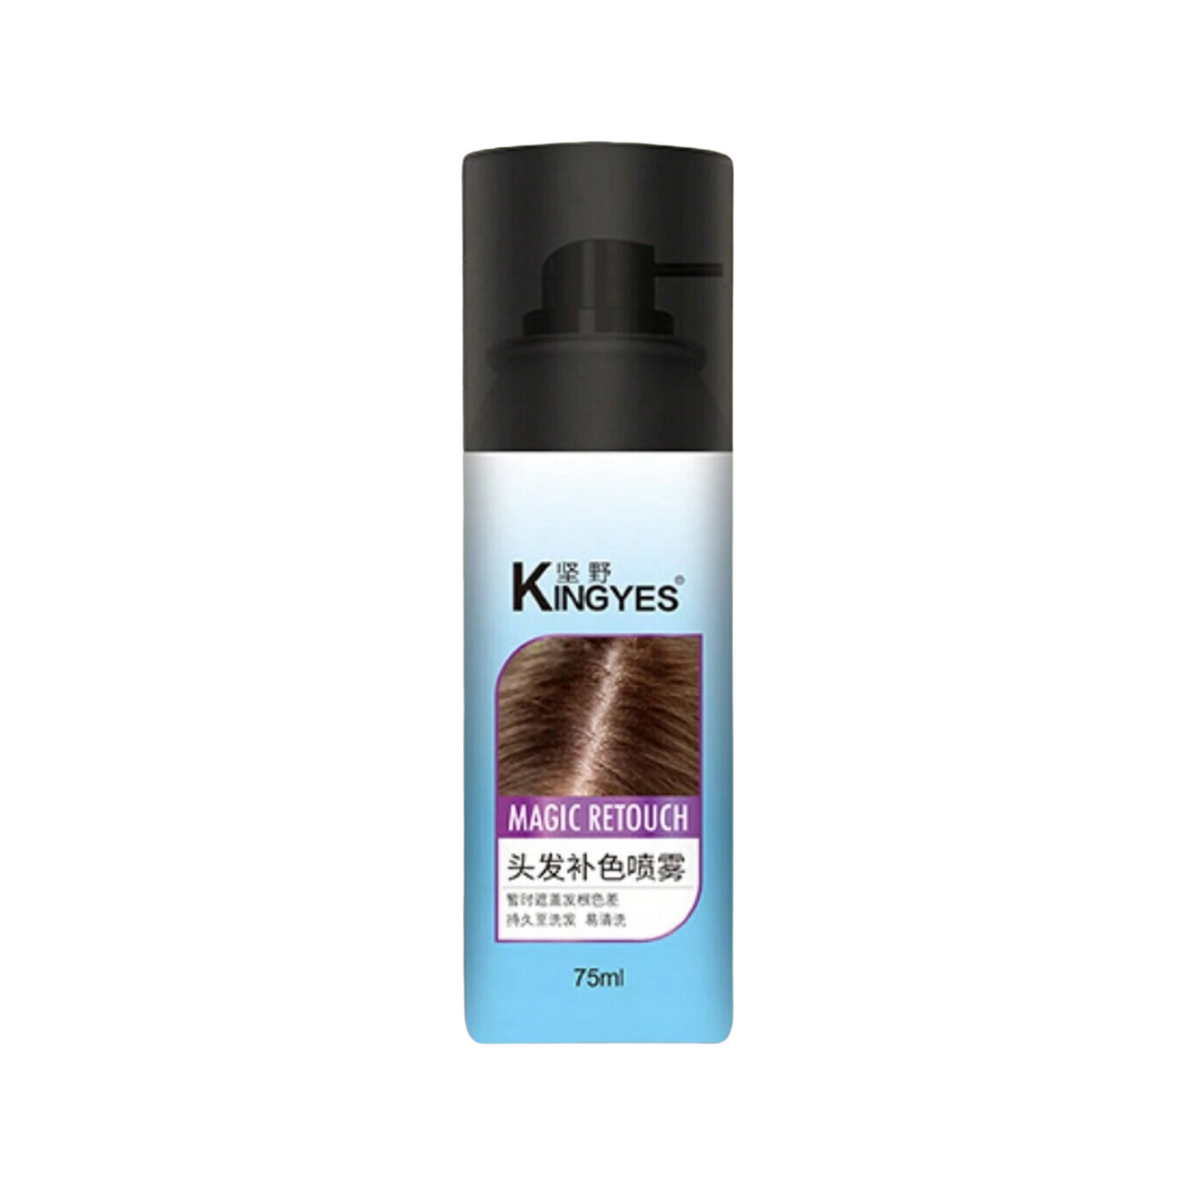 kingyes-magic-retouch-instant-root-concealer-black-spray-75ml